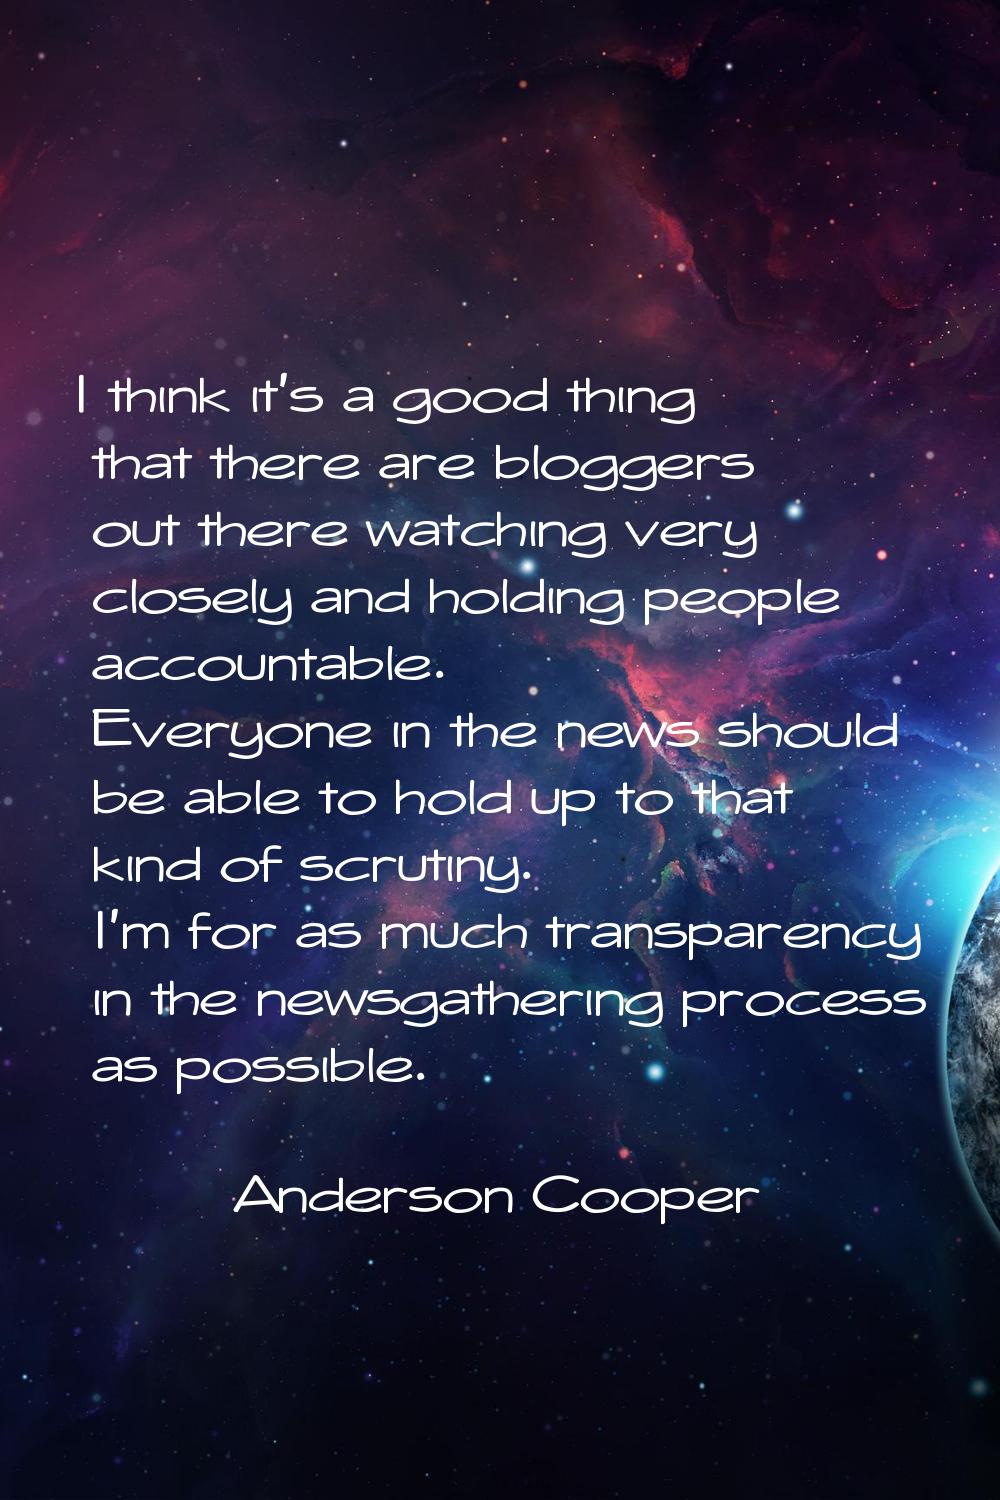 I think it's a good thing that there are bloggers out there watching very closely and holding peopl